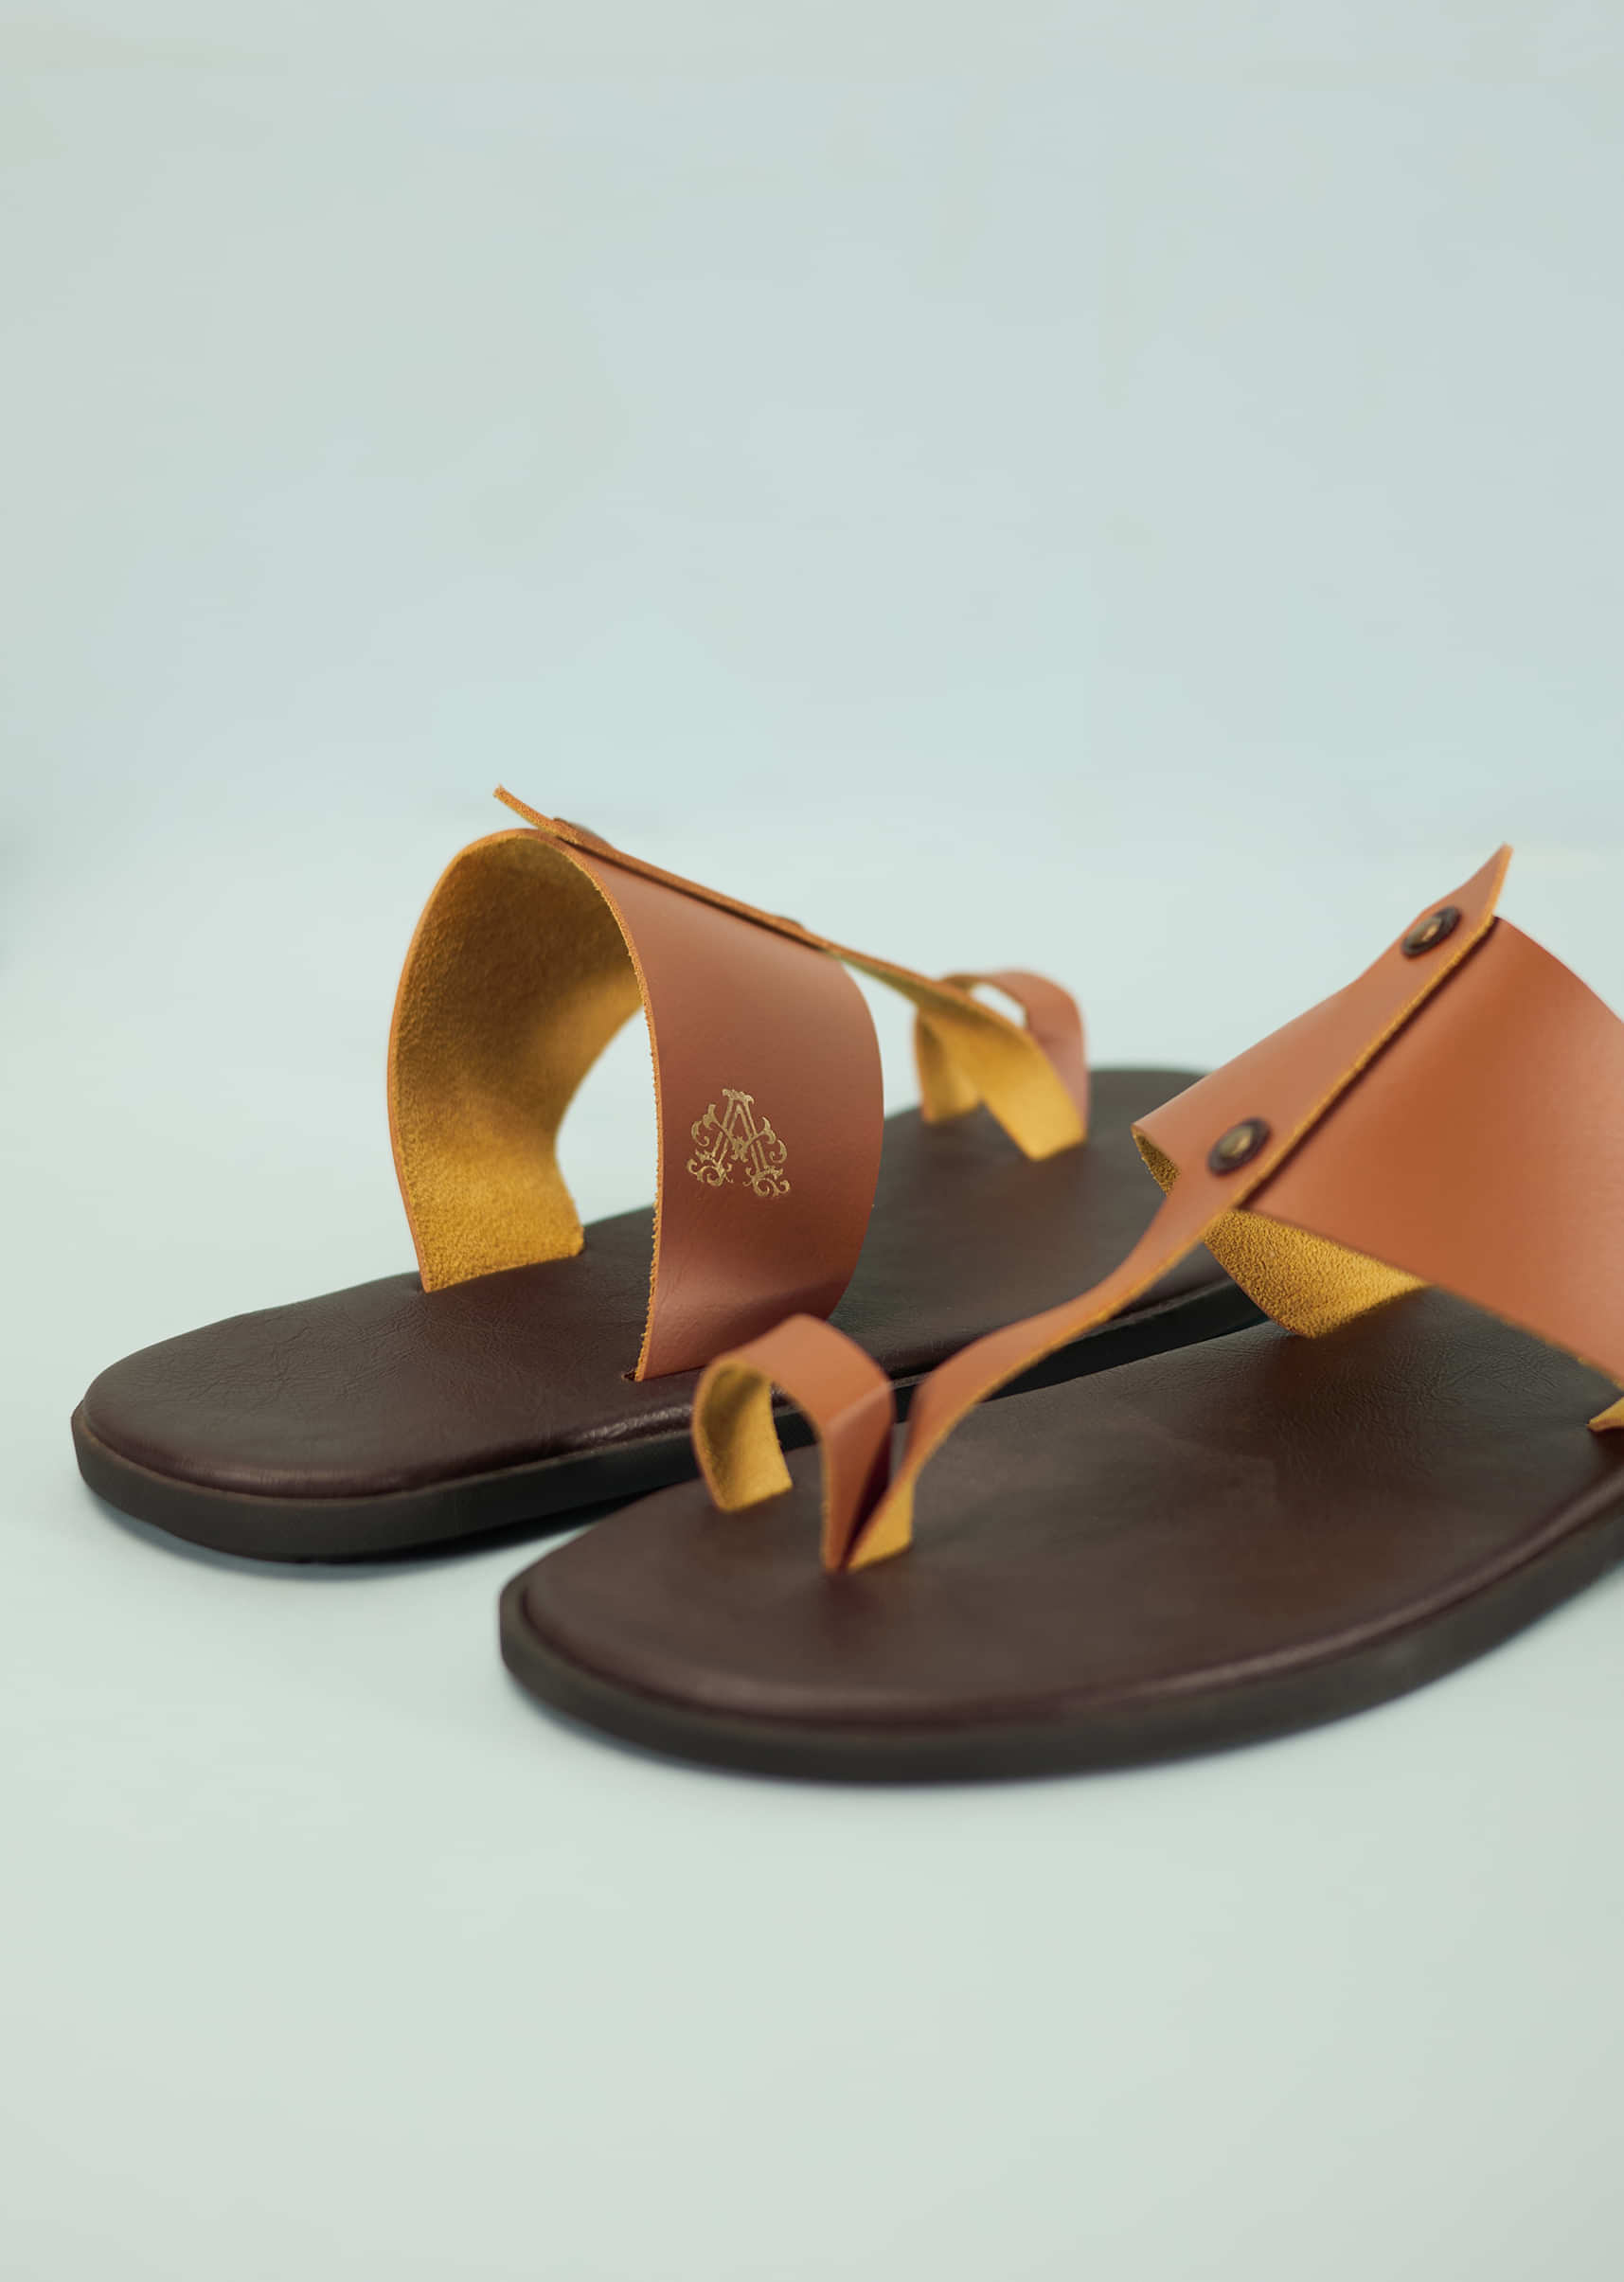 Dark And Tan Brown Strappy Slides For Men In Leather With Buttons